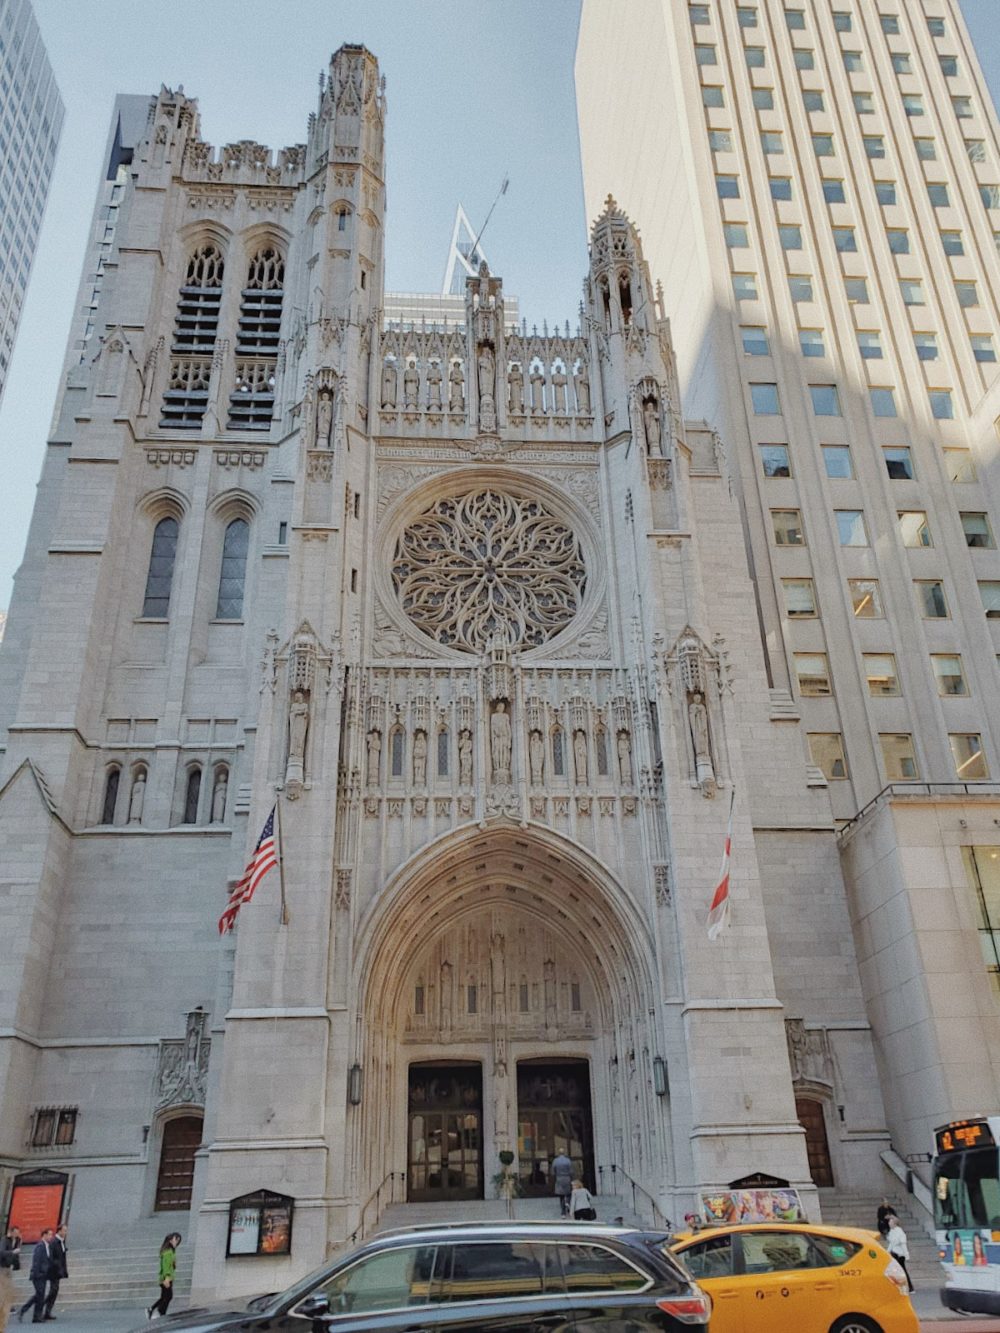 Visiting one of the gorgeous cathedrals in New York City